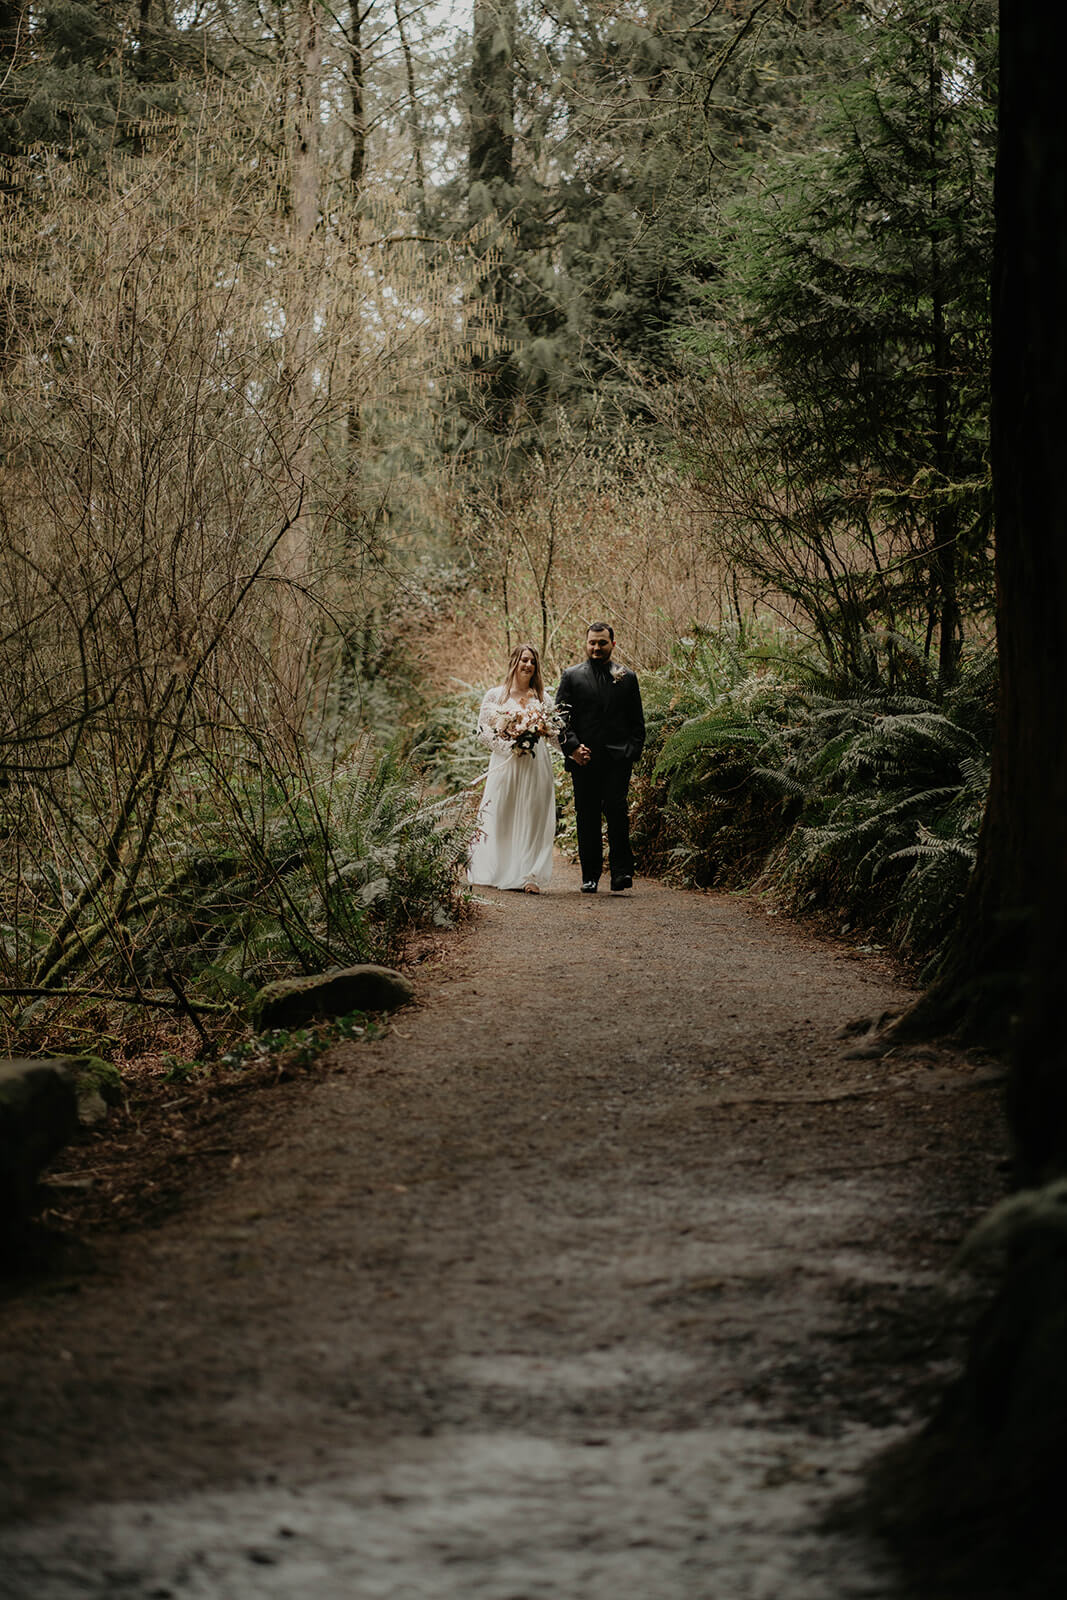 Bride and groom holding hands walking down a forest trail